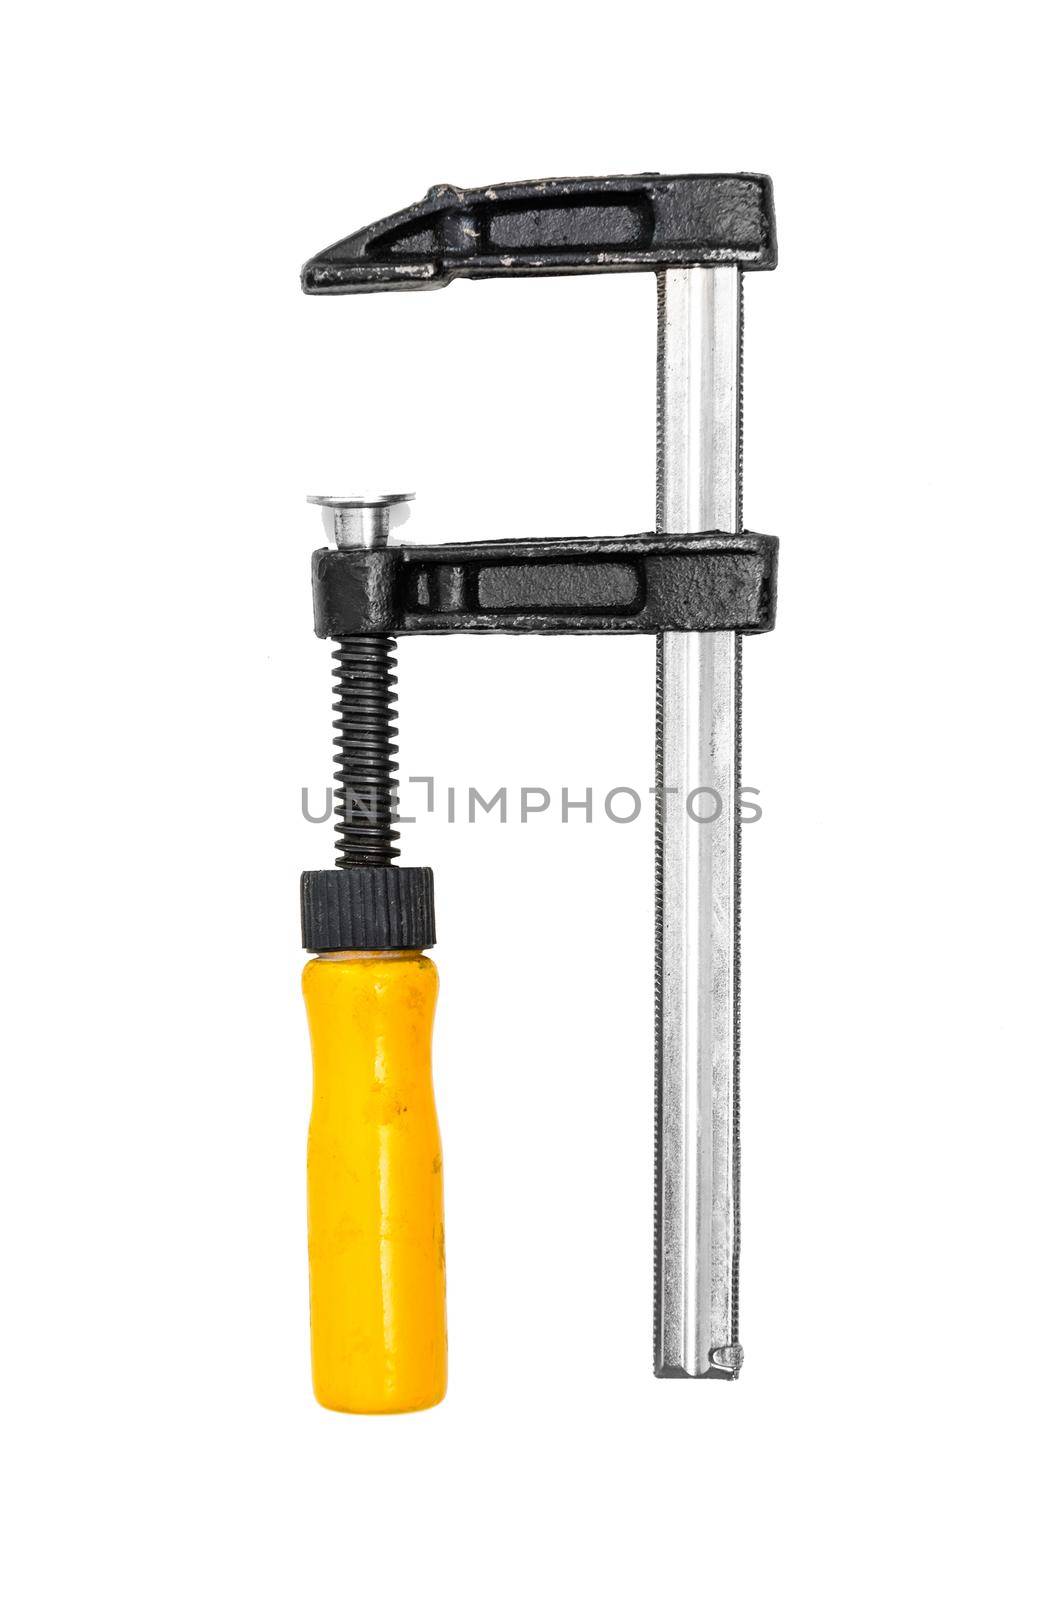 hand vise c-clamp isolated on white background